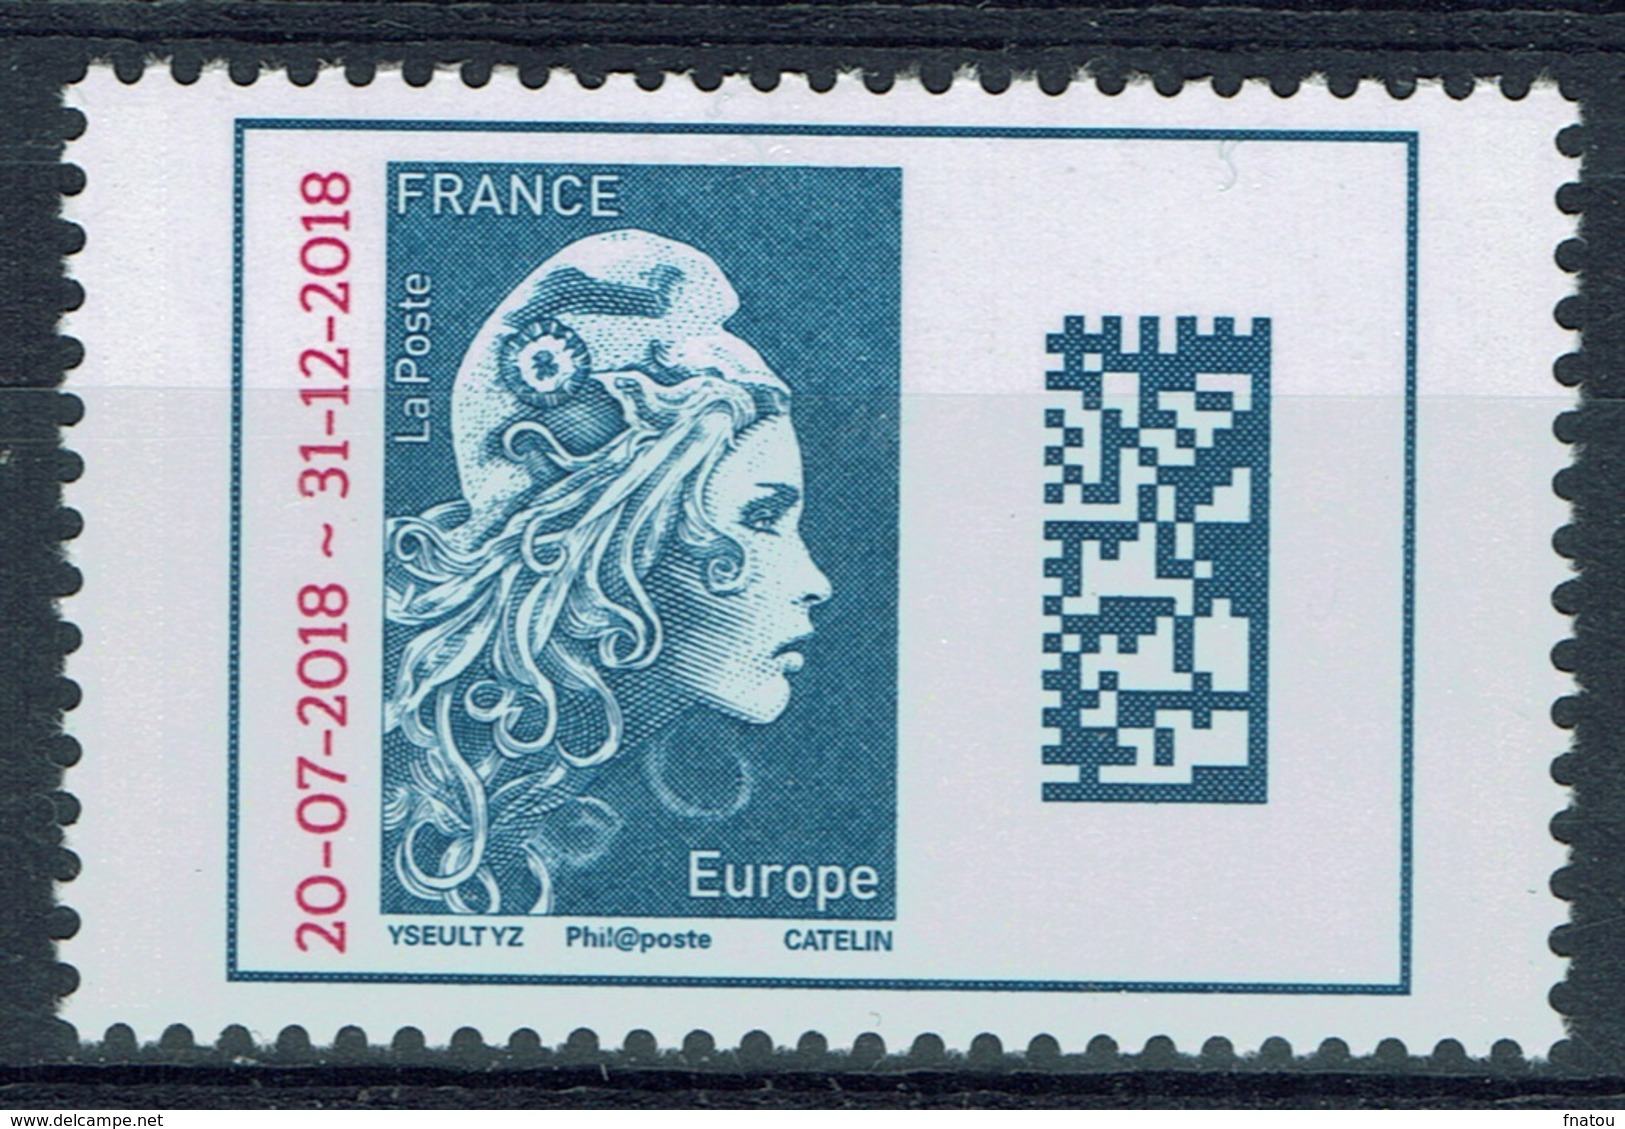 France, Marianne, "l'engagée" (the Engaged), EUROPE, Overprint "20-07-2018 - 31-12-2018", 2018, MNH VF - Nuevos